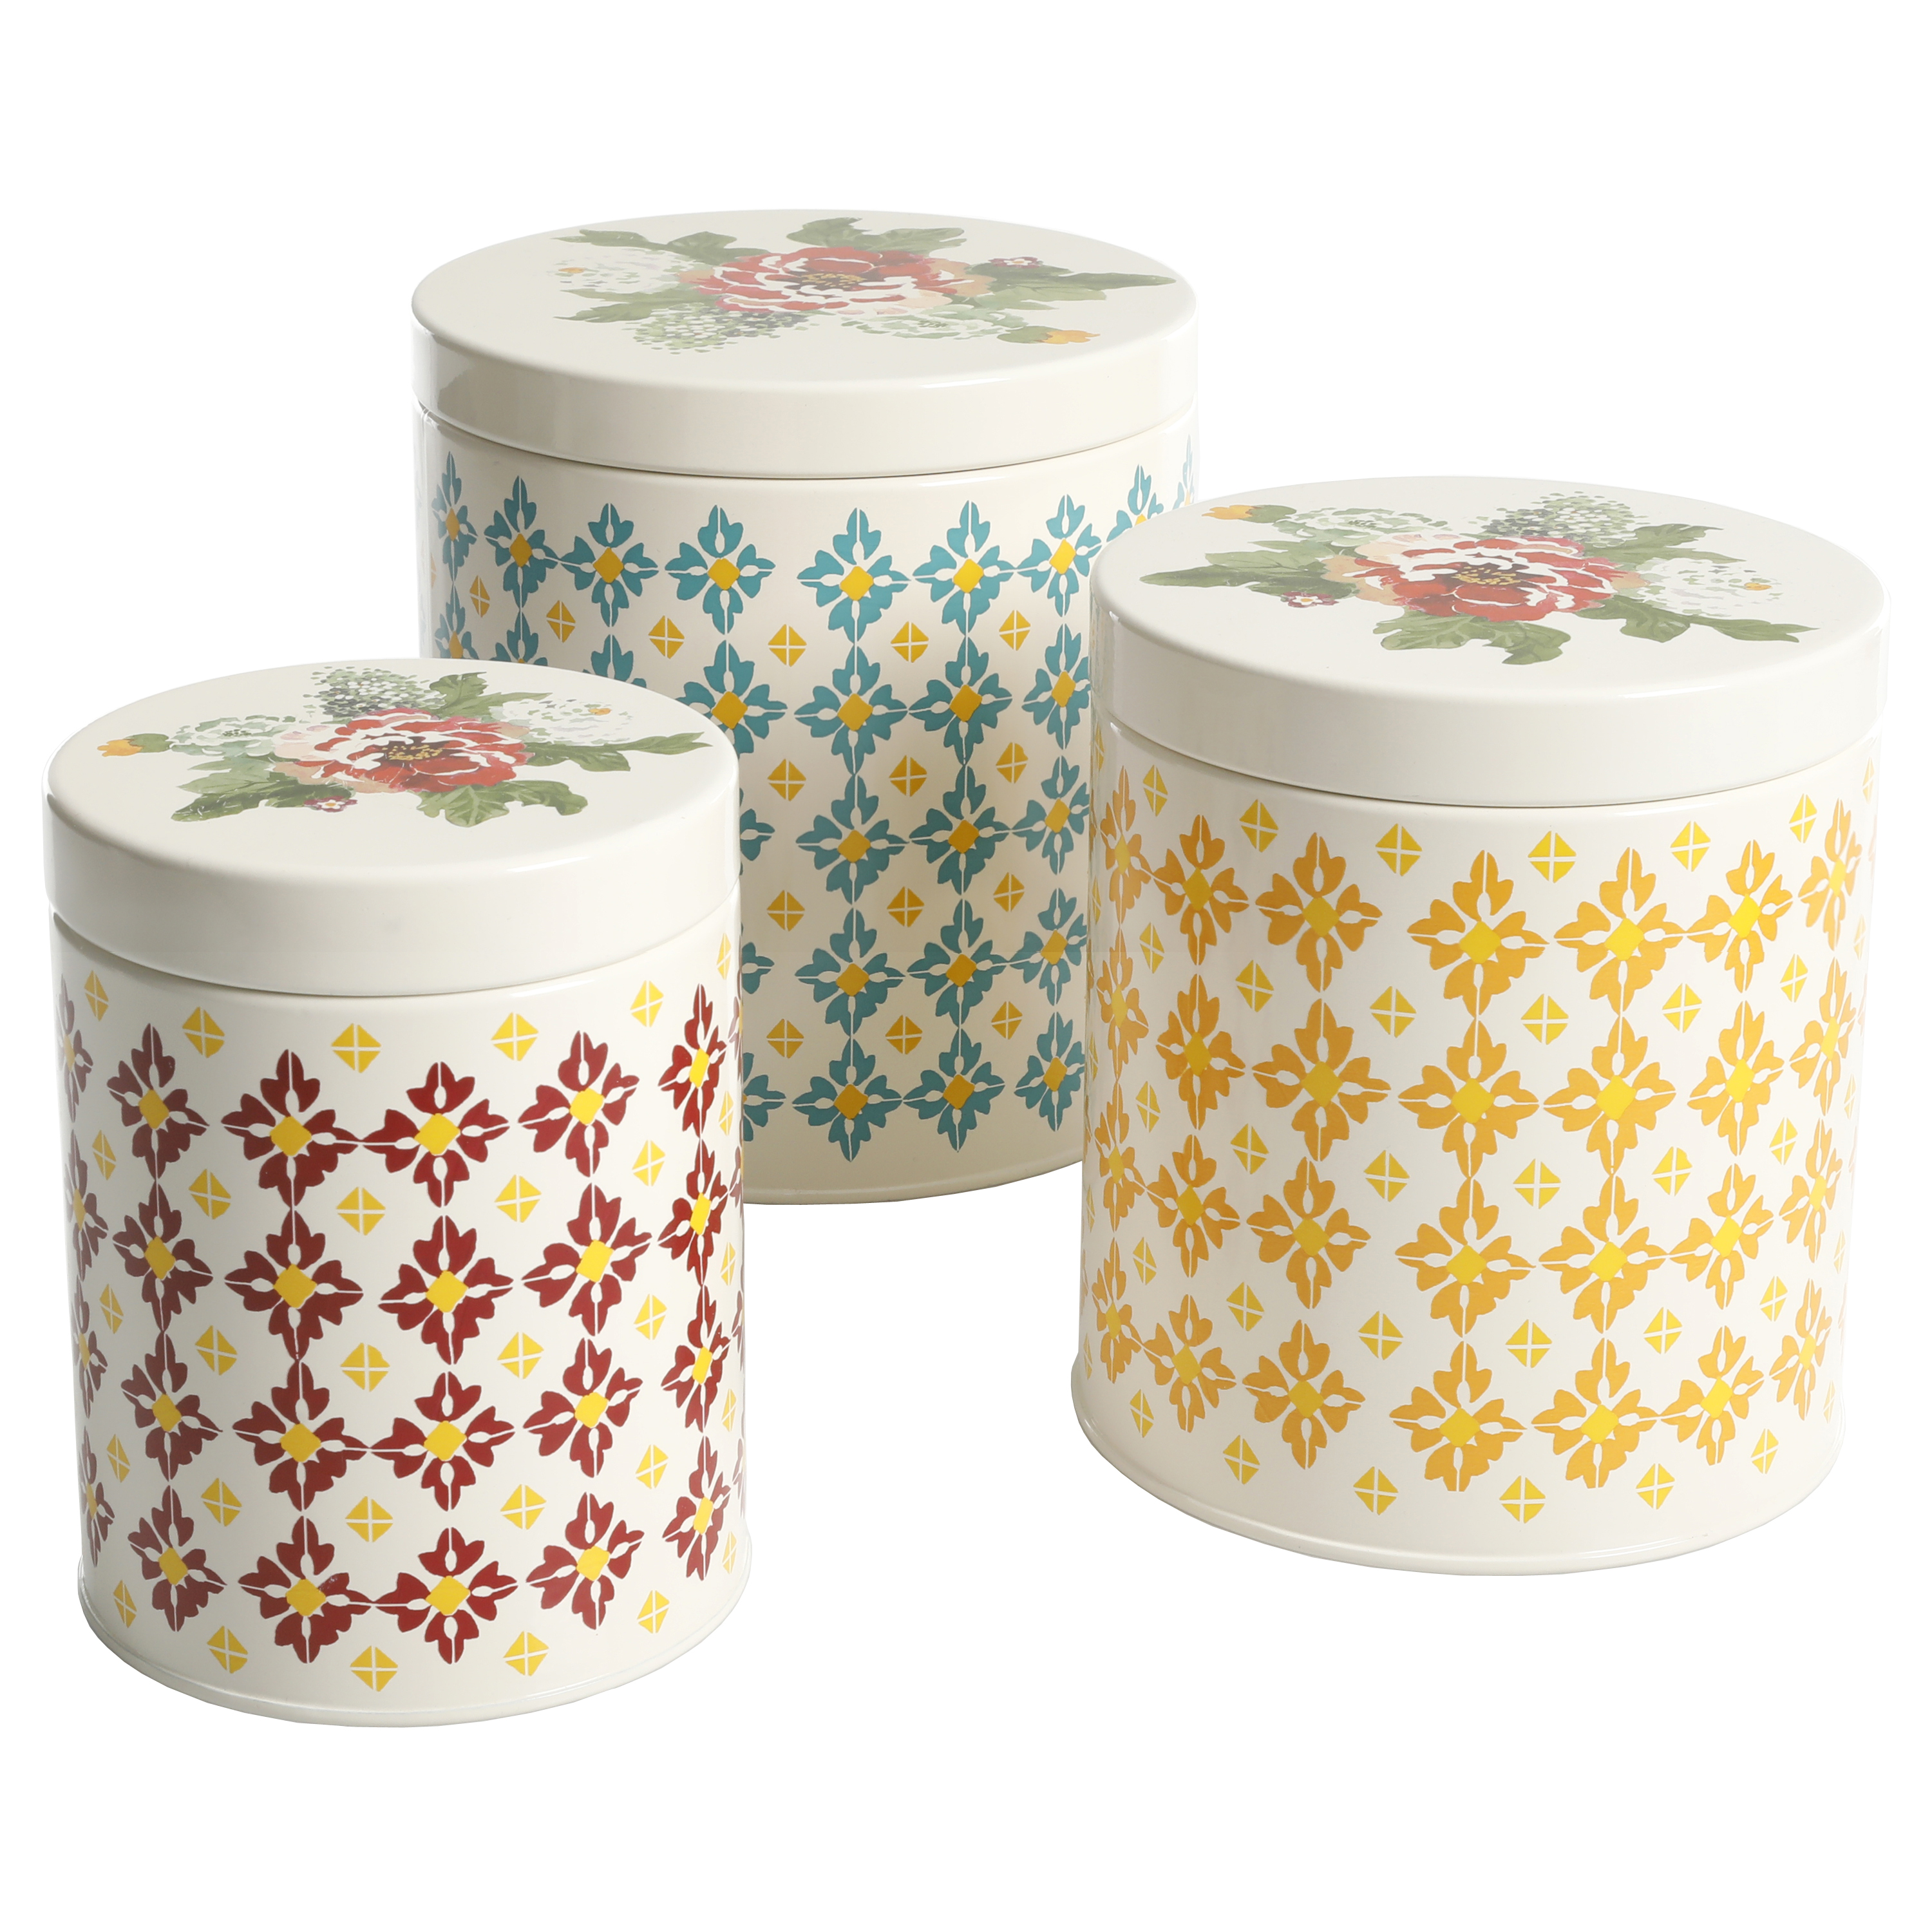 The Pioneer Woman Vintage Geo 3-Piece Canister Set - image 1 of 6